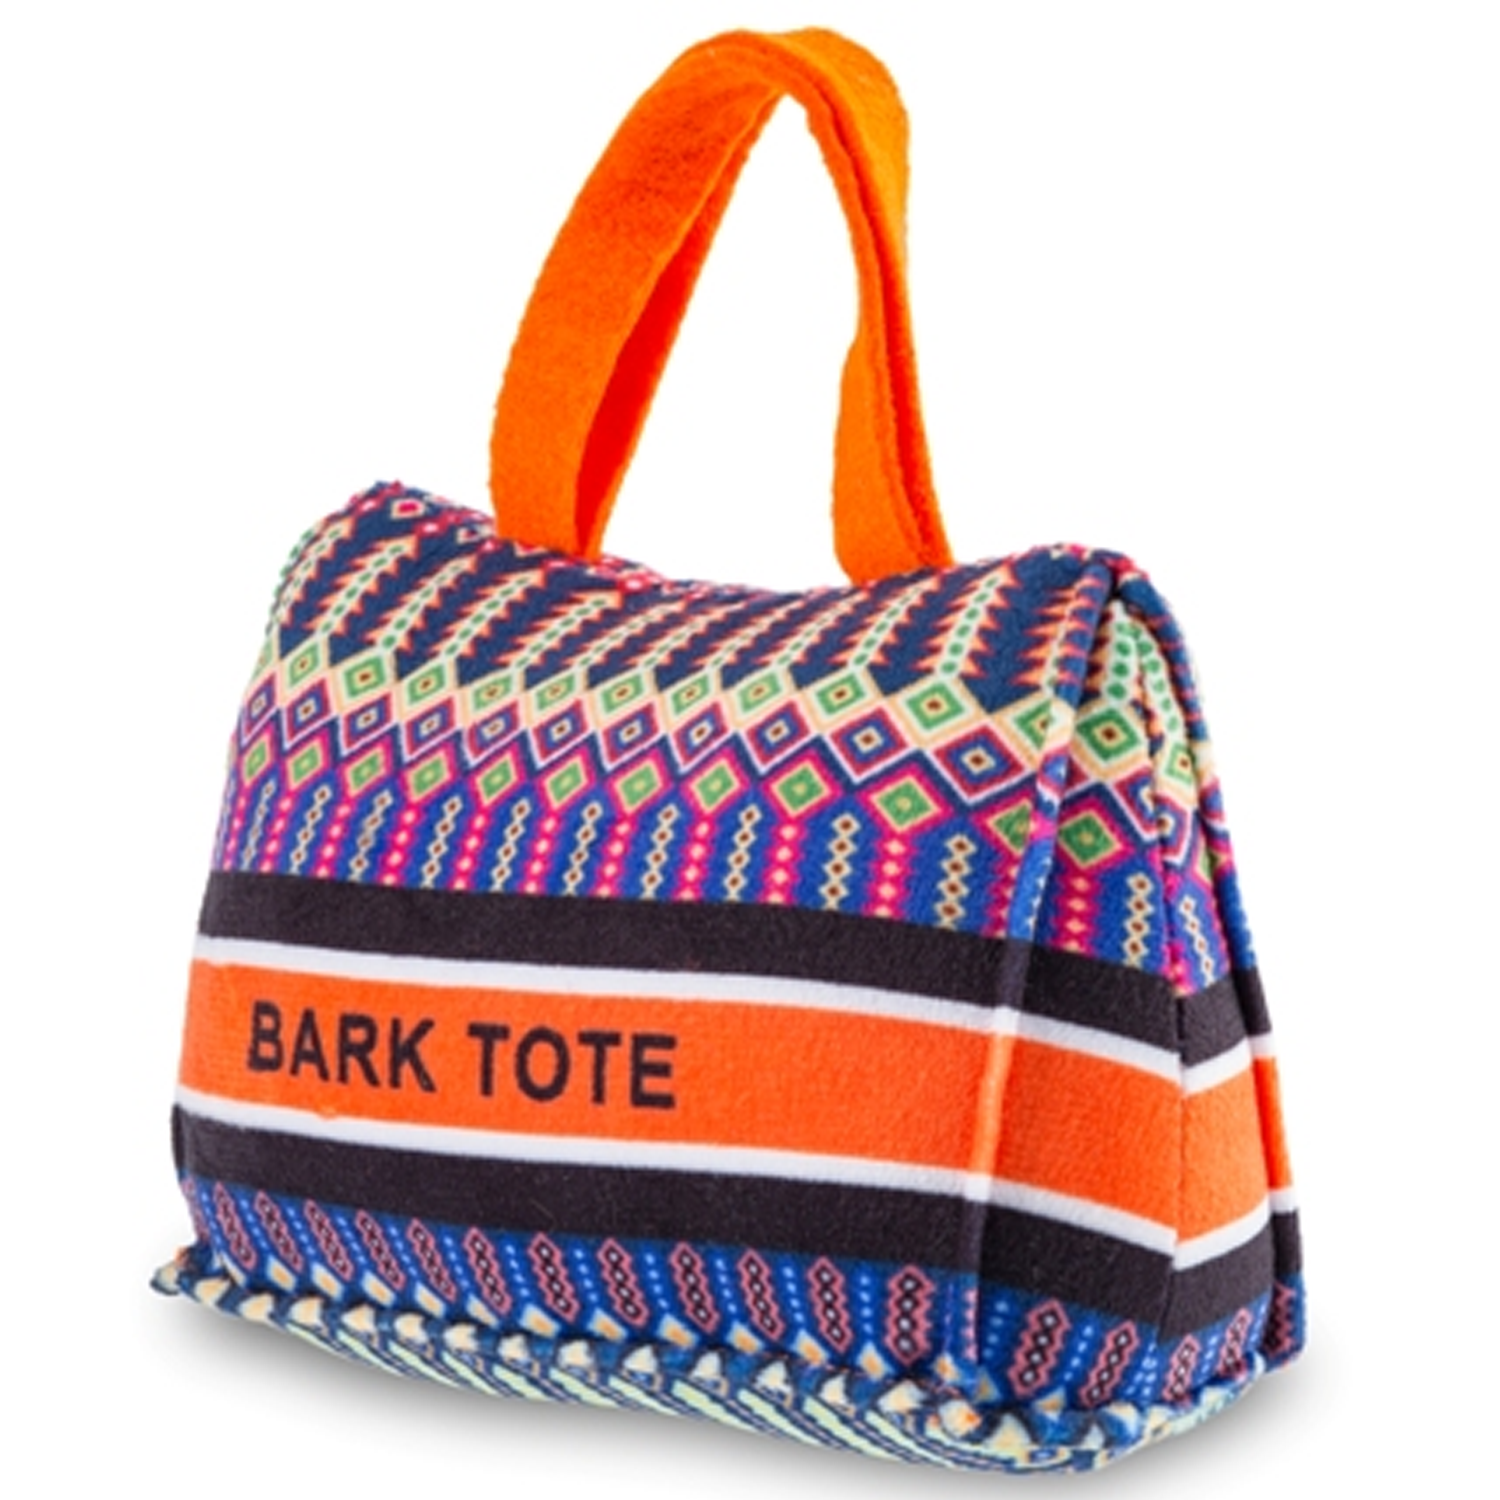 Dog Toys - Dogior Bark Tote Dog Toy by Haute Diggity Dog